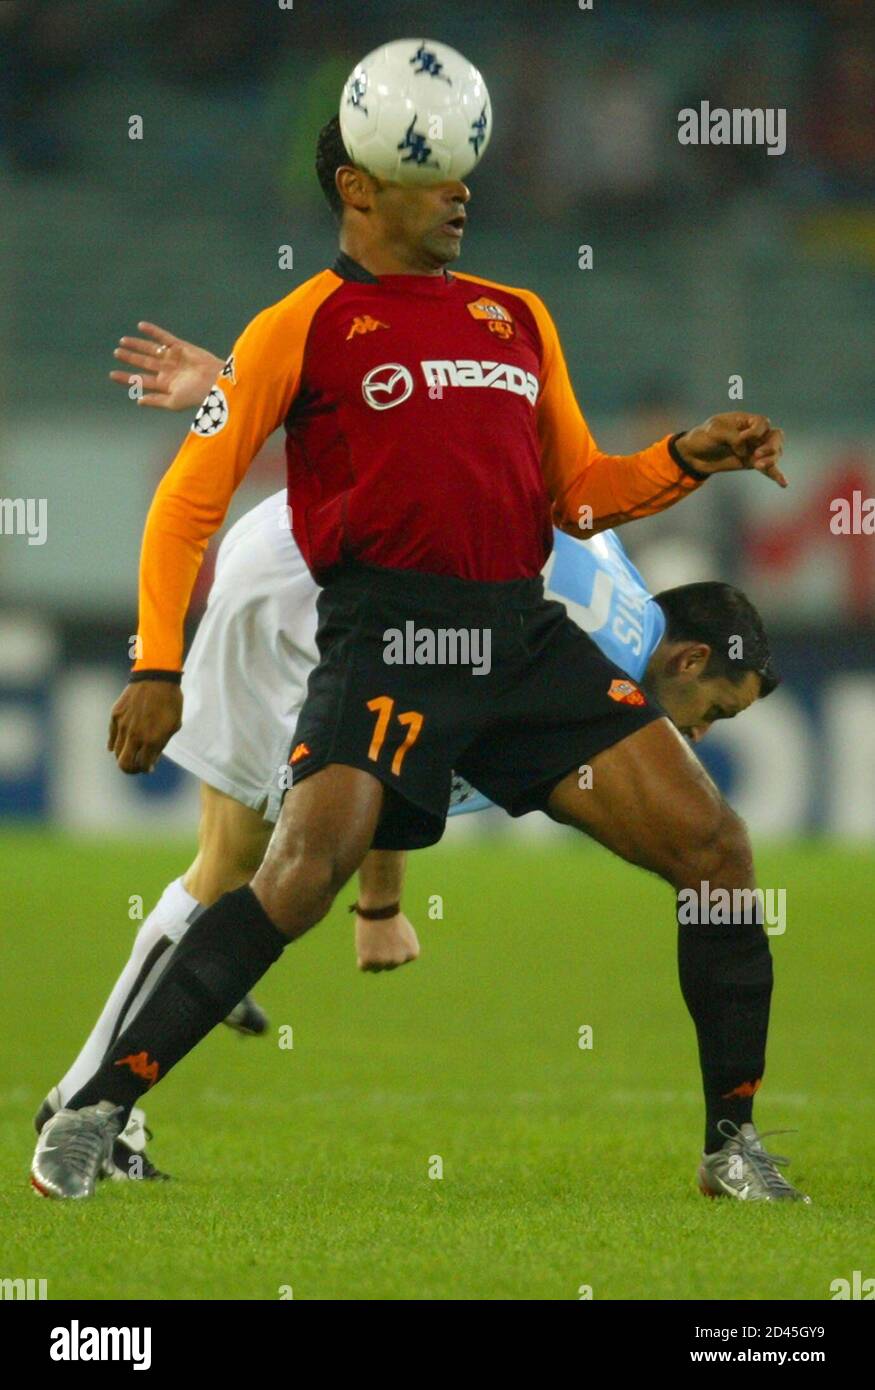 AS ROMA'S EMERSON AND LAKIS OF AEK ATHENS CHALLENGE FOR THE BALL DURING  THEIR CHAMPIONS LEAGUE MATCH IN ROME Stock Photo - Alamy